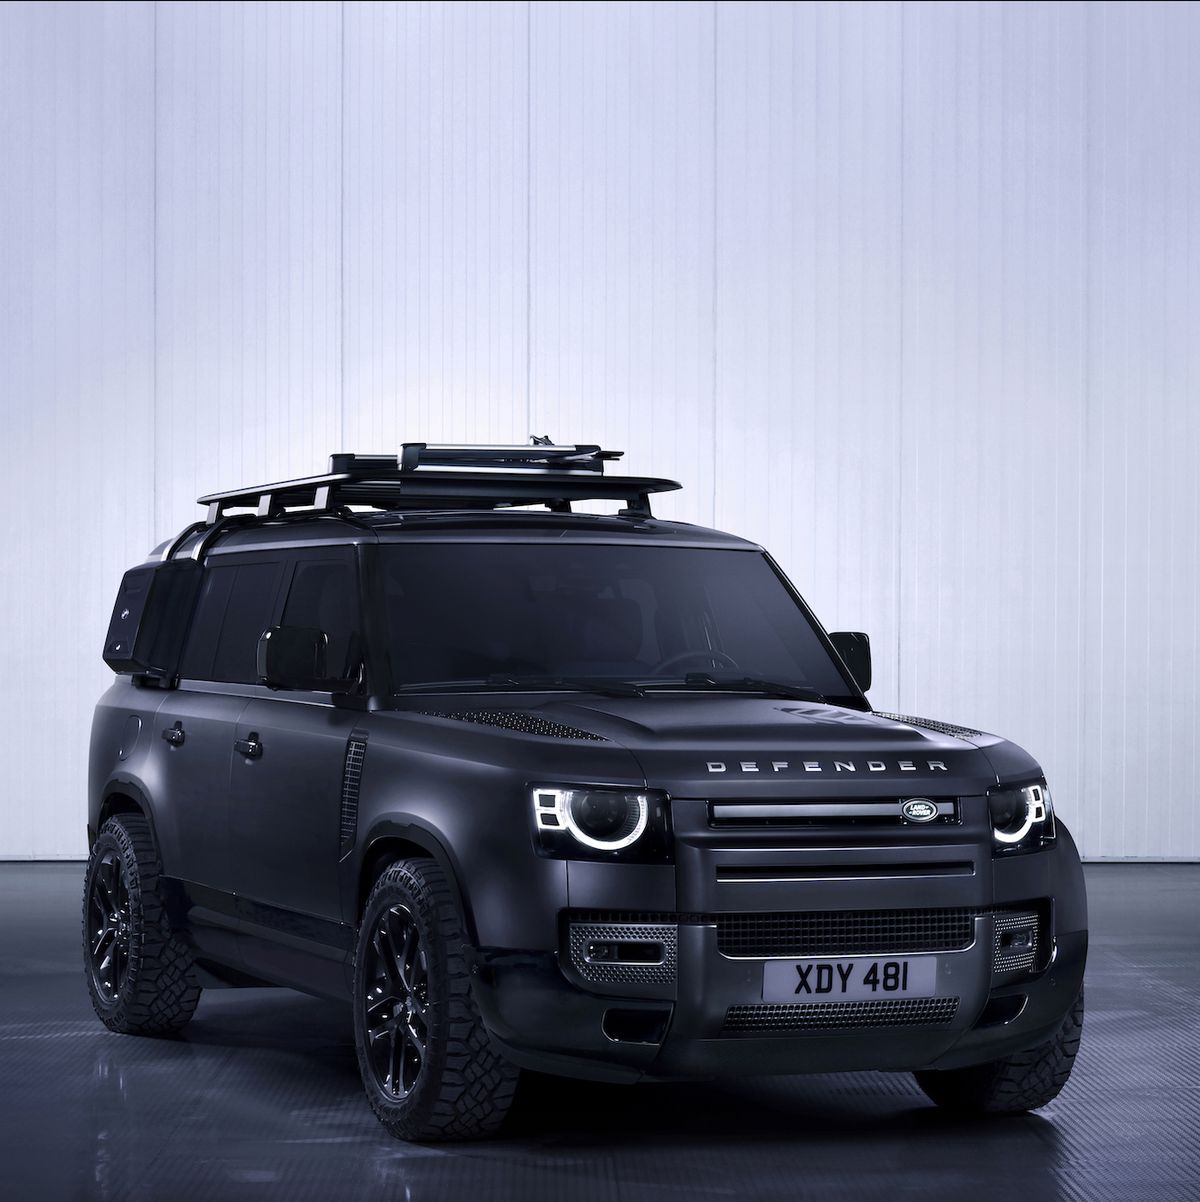 Land Rover Defender lineup expands to three vehicles with 8-seat, defender  